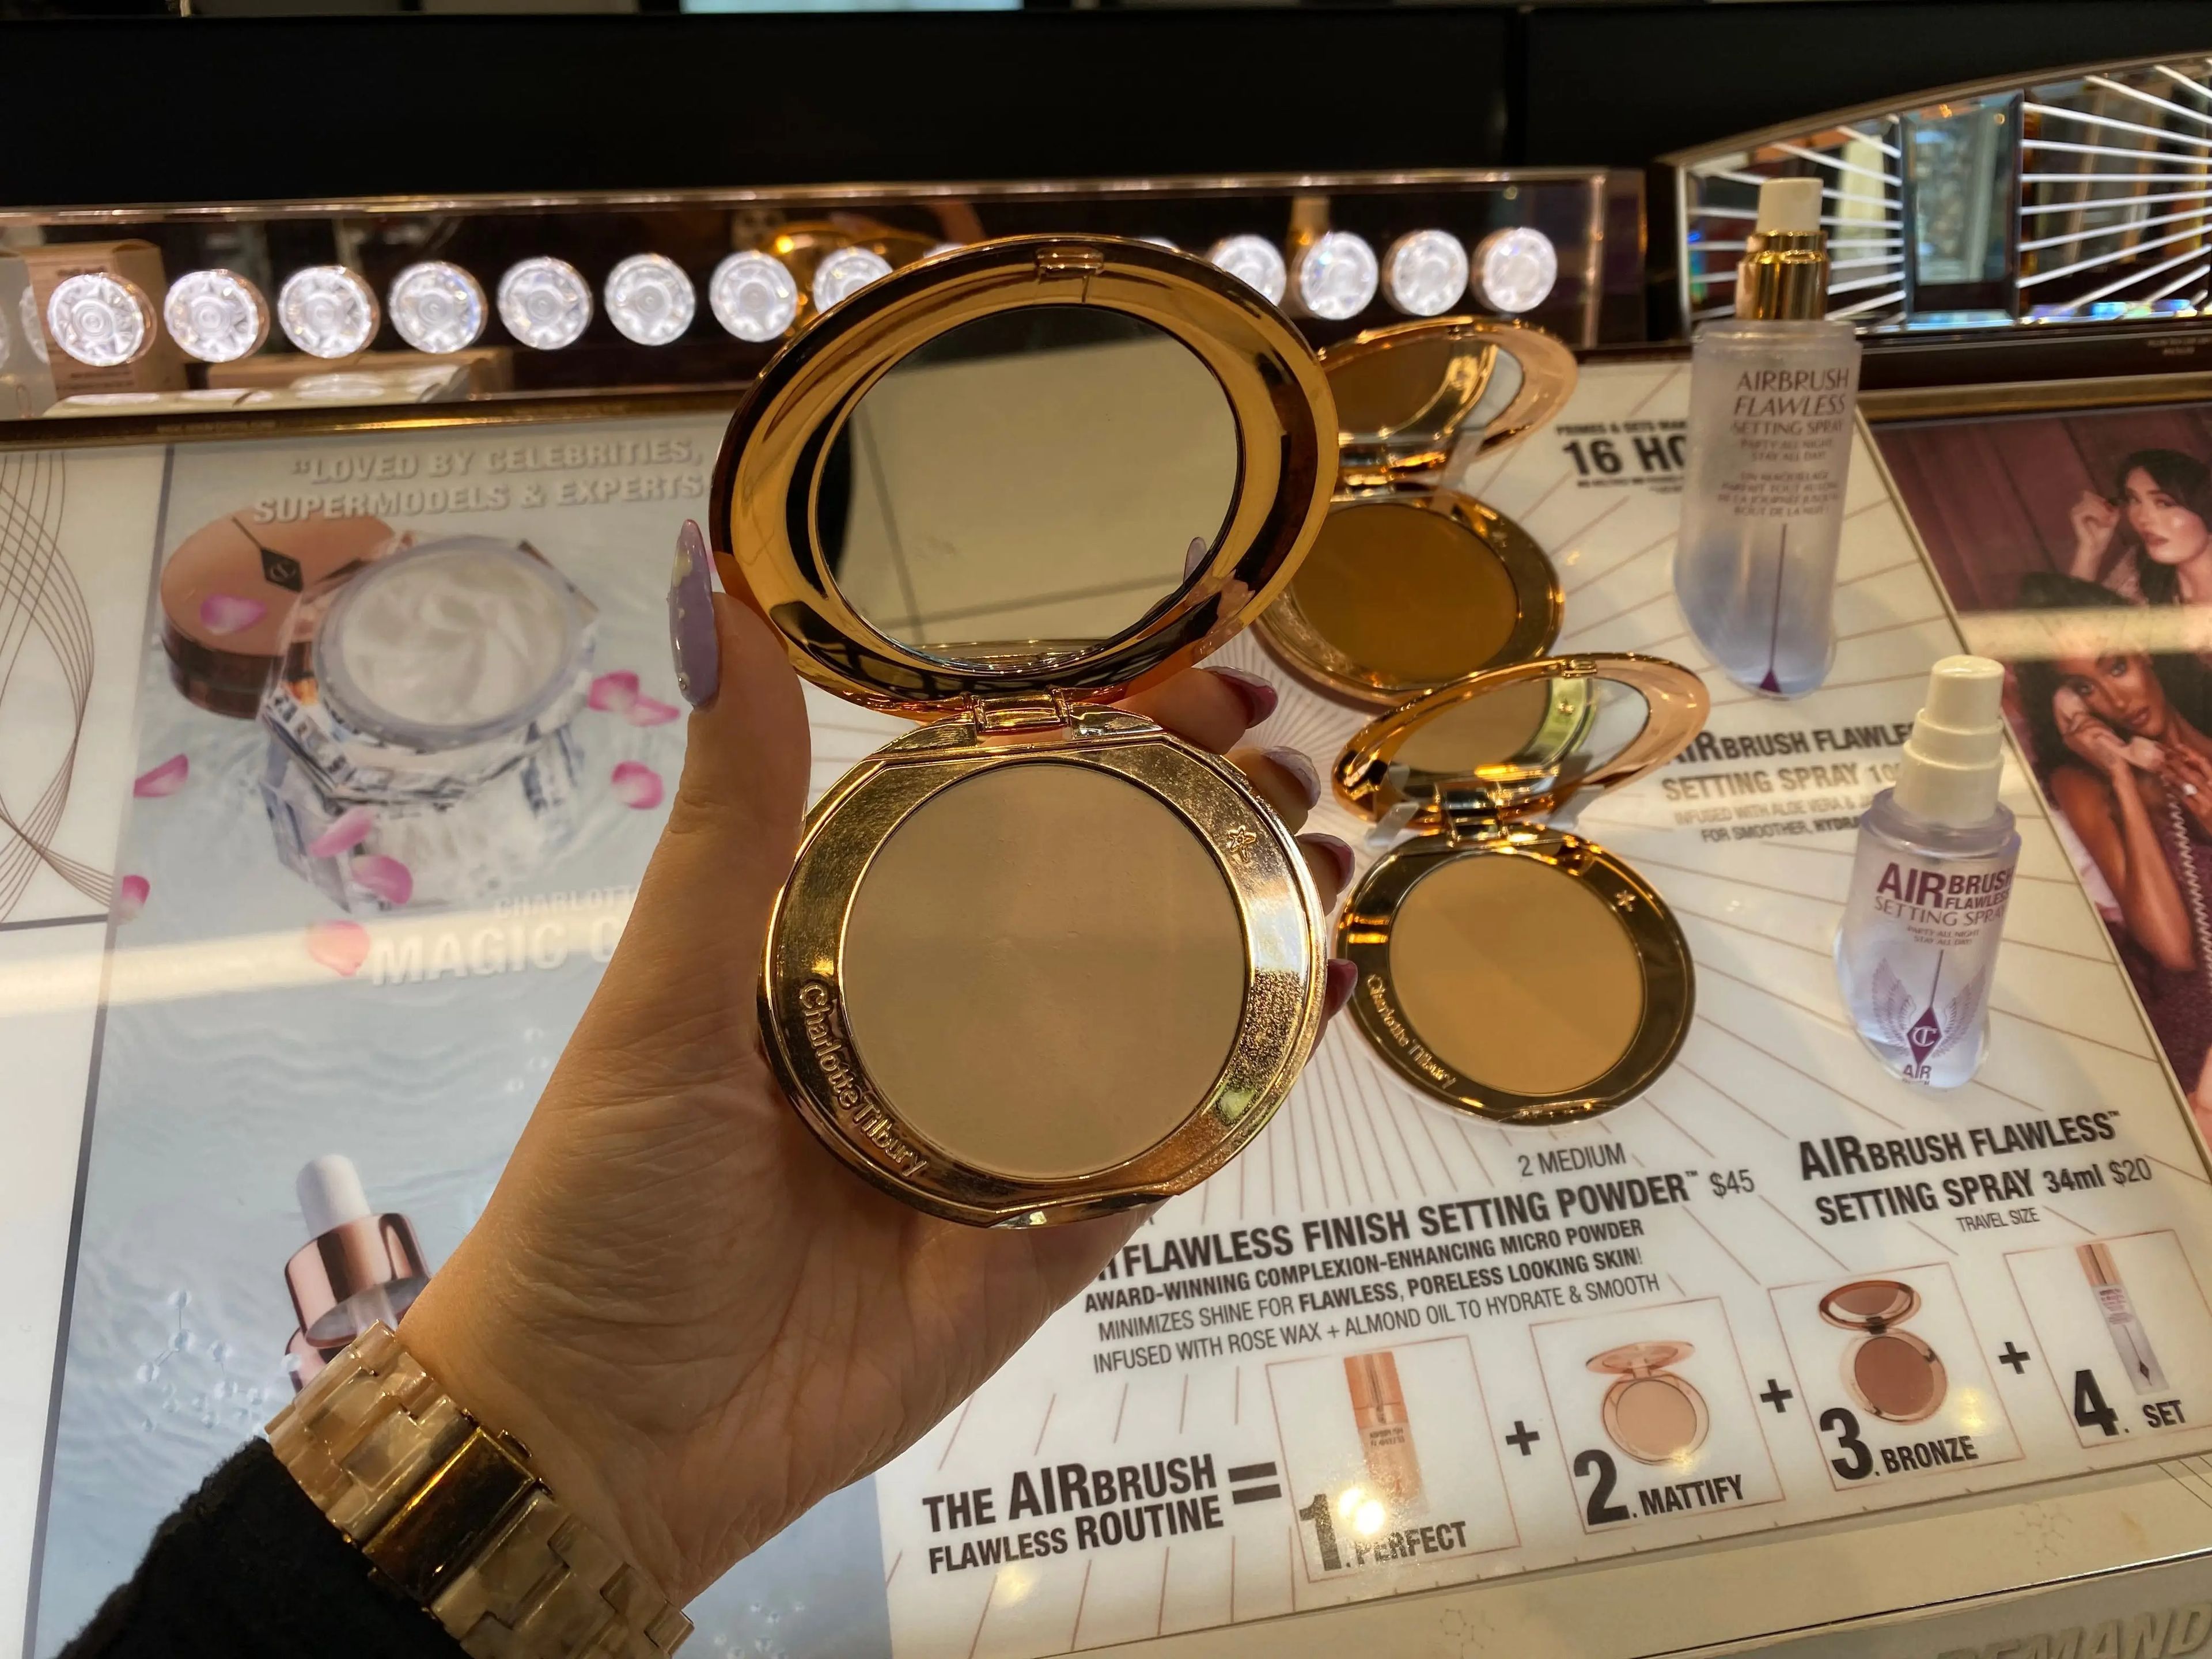 The writer holds a Charlotte Tilbury powder open in front of a display with blue imagery and bright lights in Sephora. The reflection of a white-tile floor can be seen in the mirror of the powder compact.